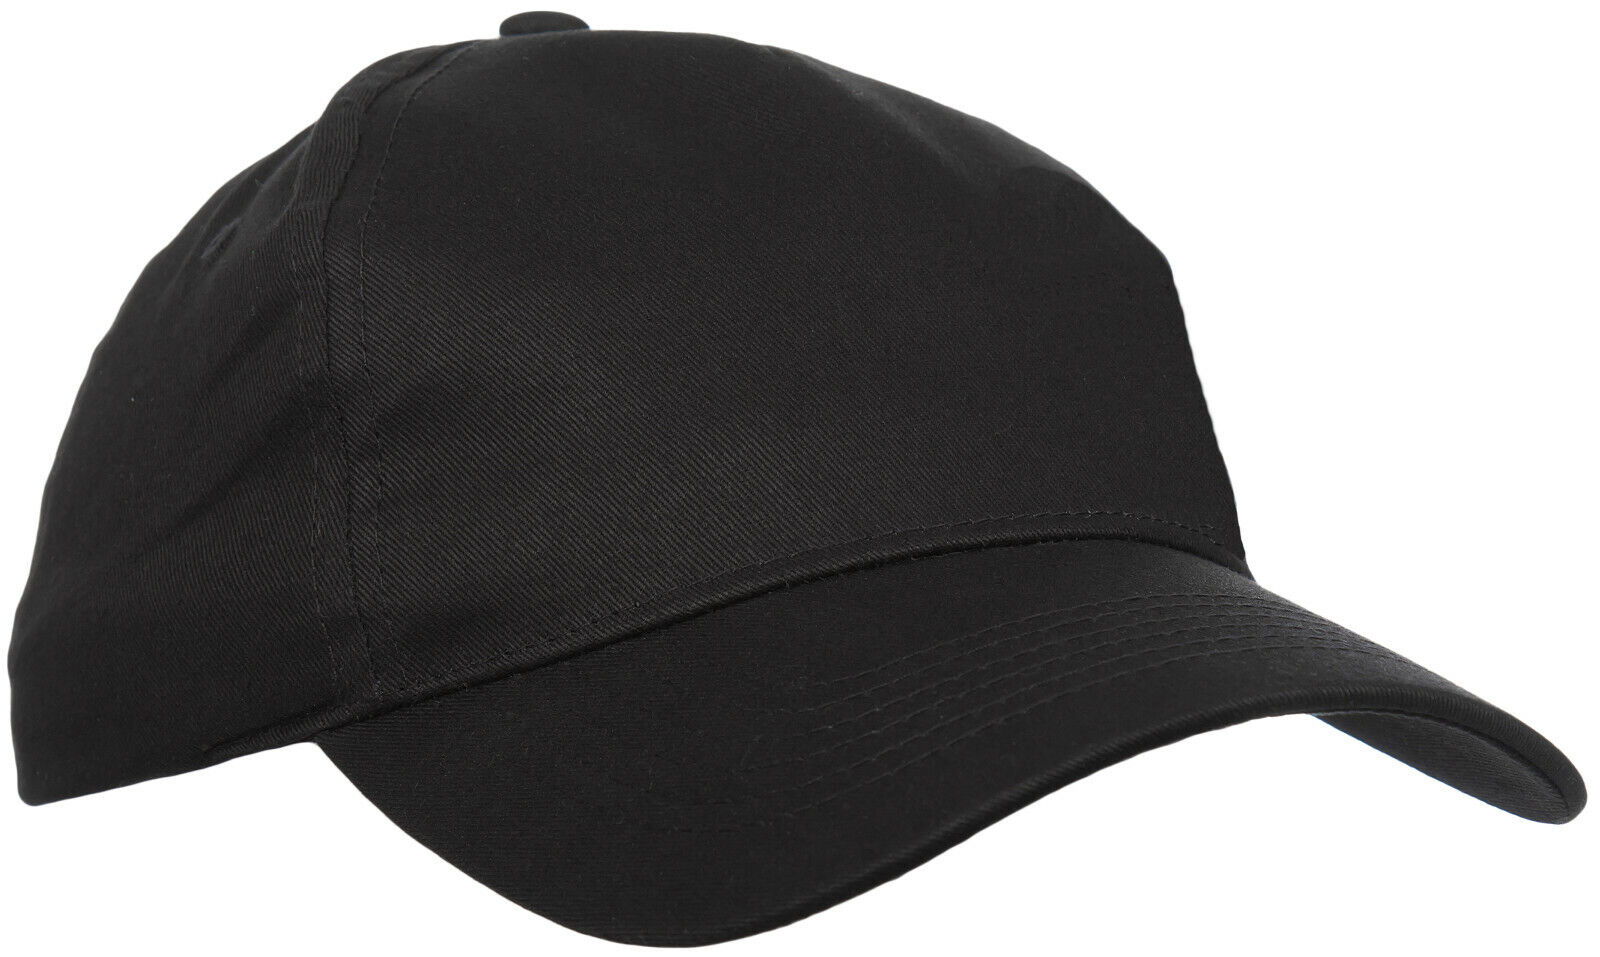 Mens Classic Plain Adjustable Baseball Caps By MIG - WORK CASUAL SPORTS LEISURE